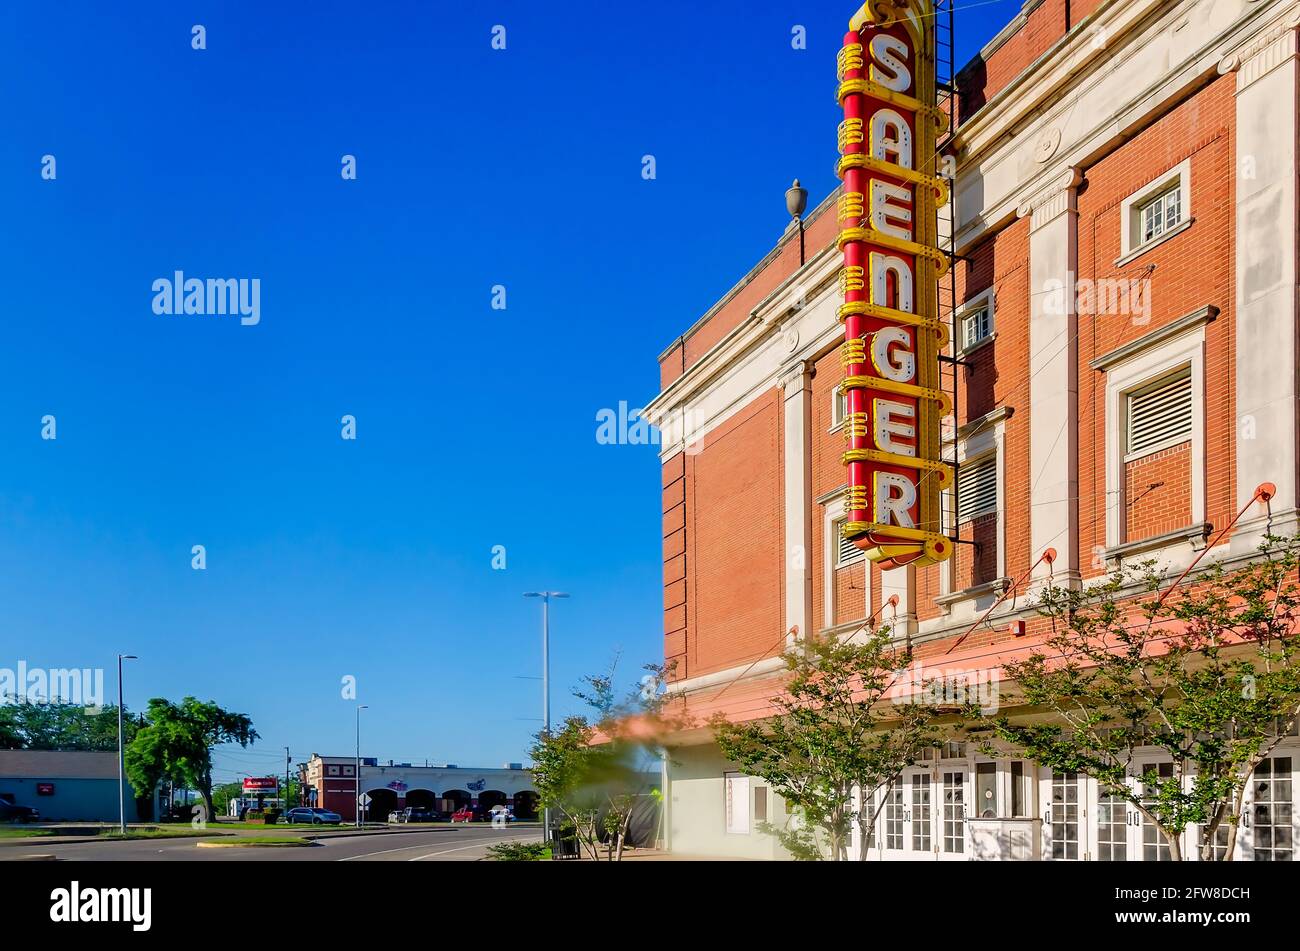 The Saenger Theatre is pictured, May 8, 2021, in Biloxi, Mississippi. The theatre was built in 1928 in the New Classical Revival architectural style . Stock Photo